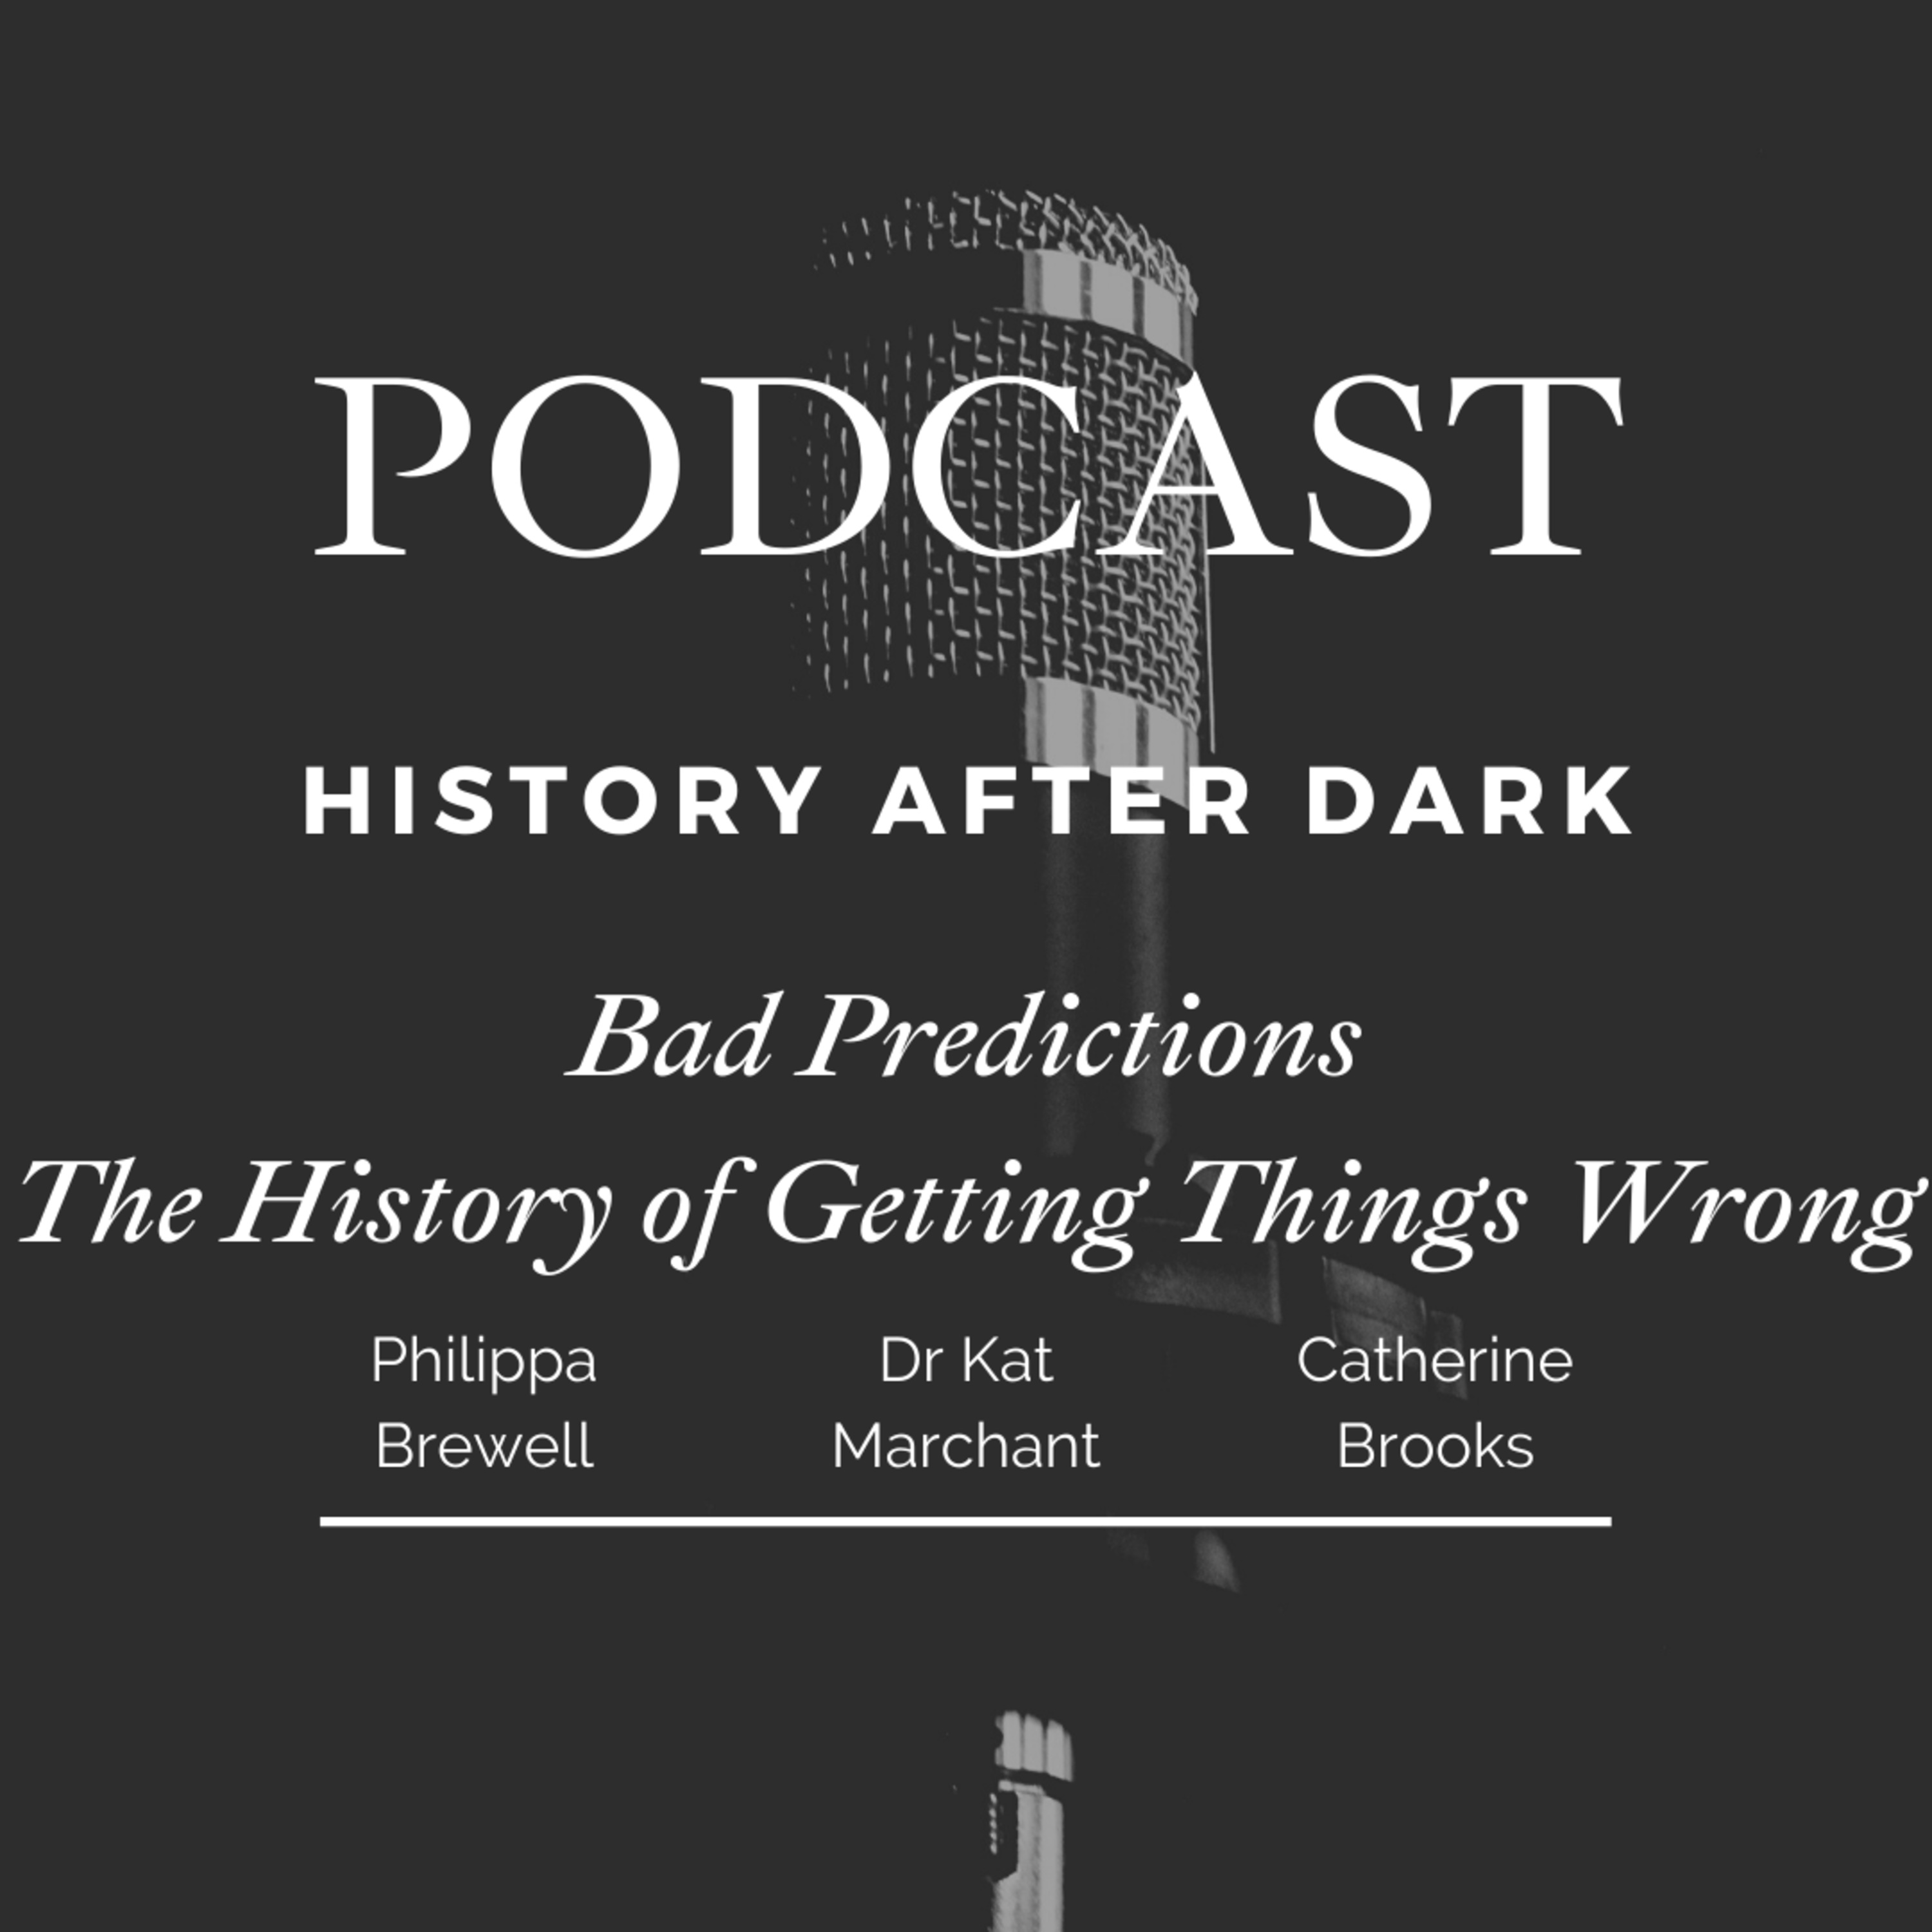 Bad Predictions - The History of Getting Things Wrong